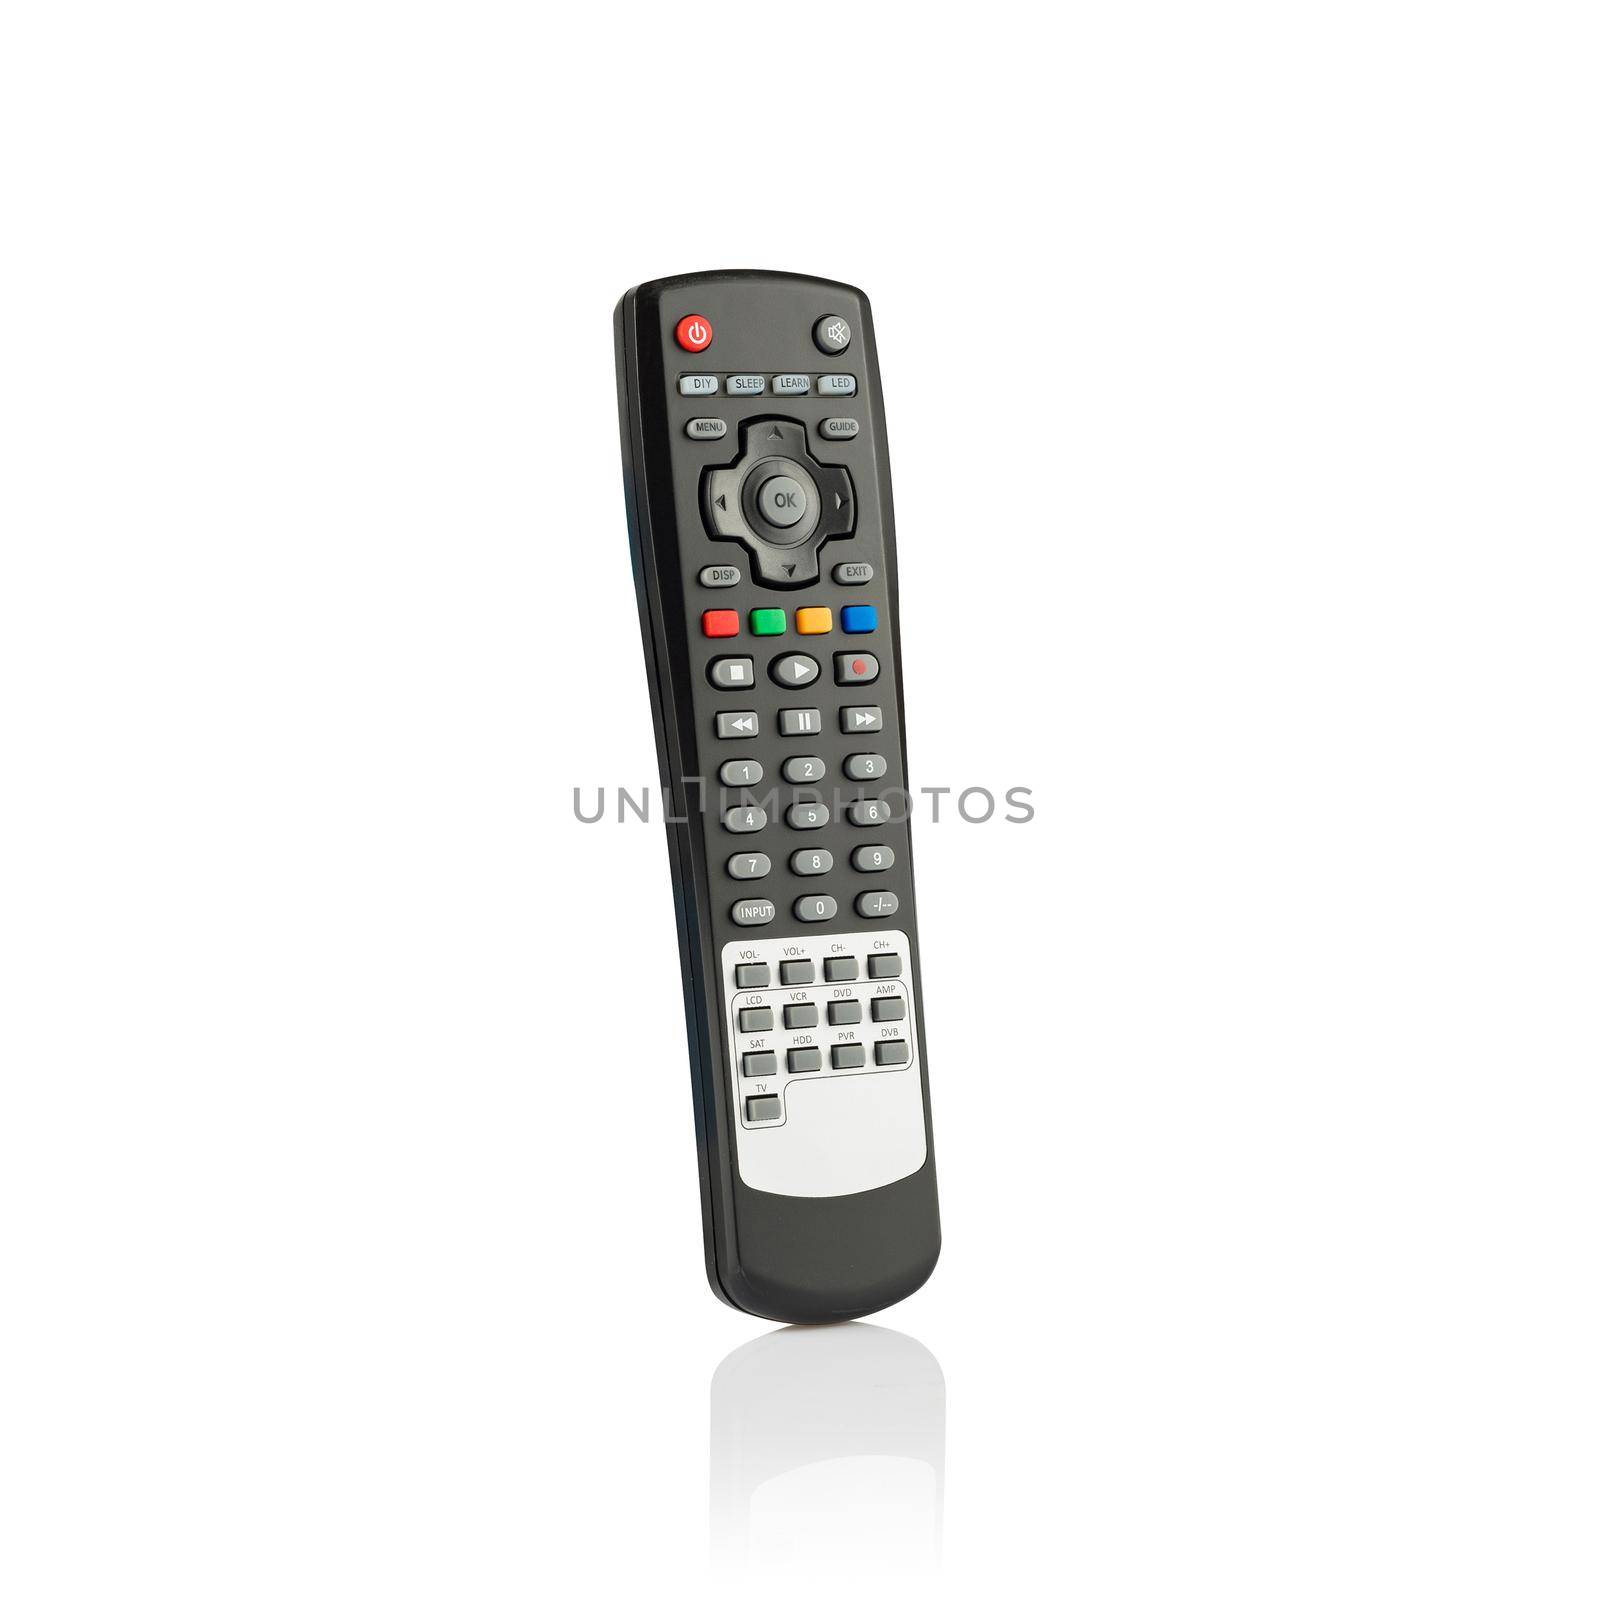 Infrared remote control for TV satellite receiver isolated on white background